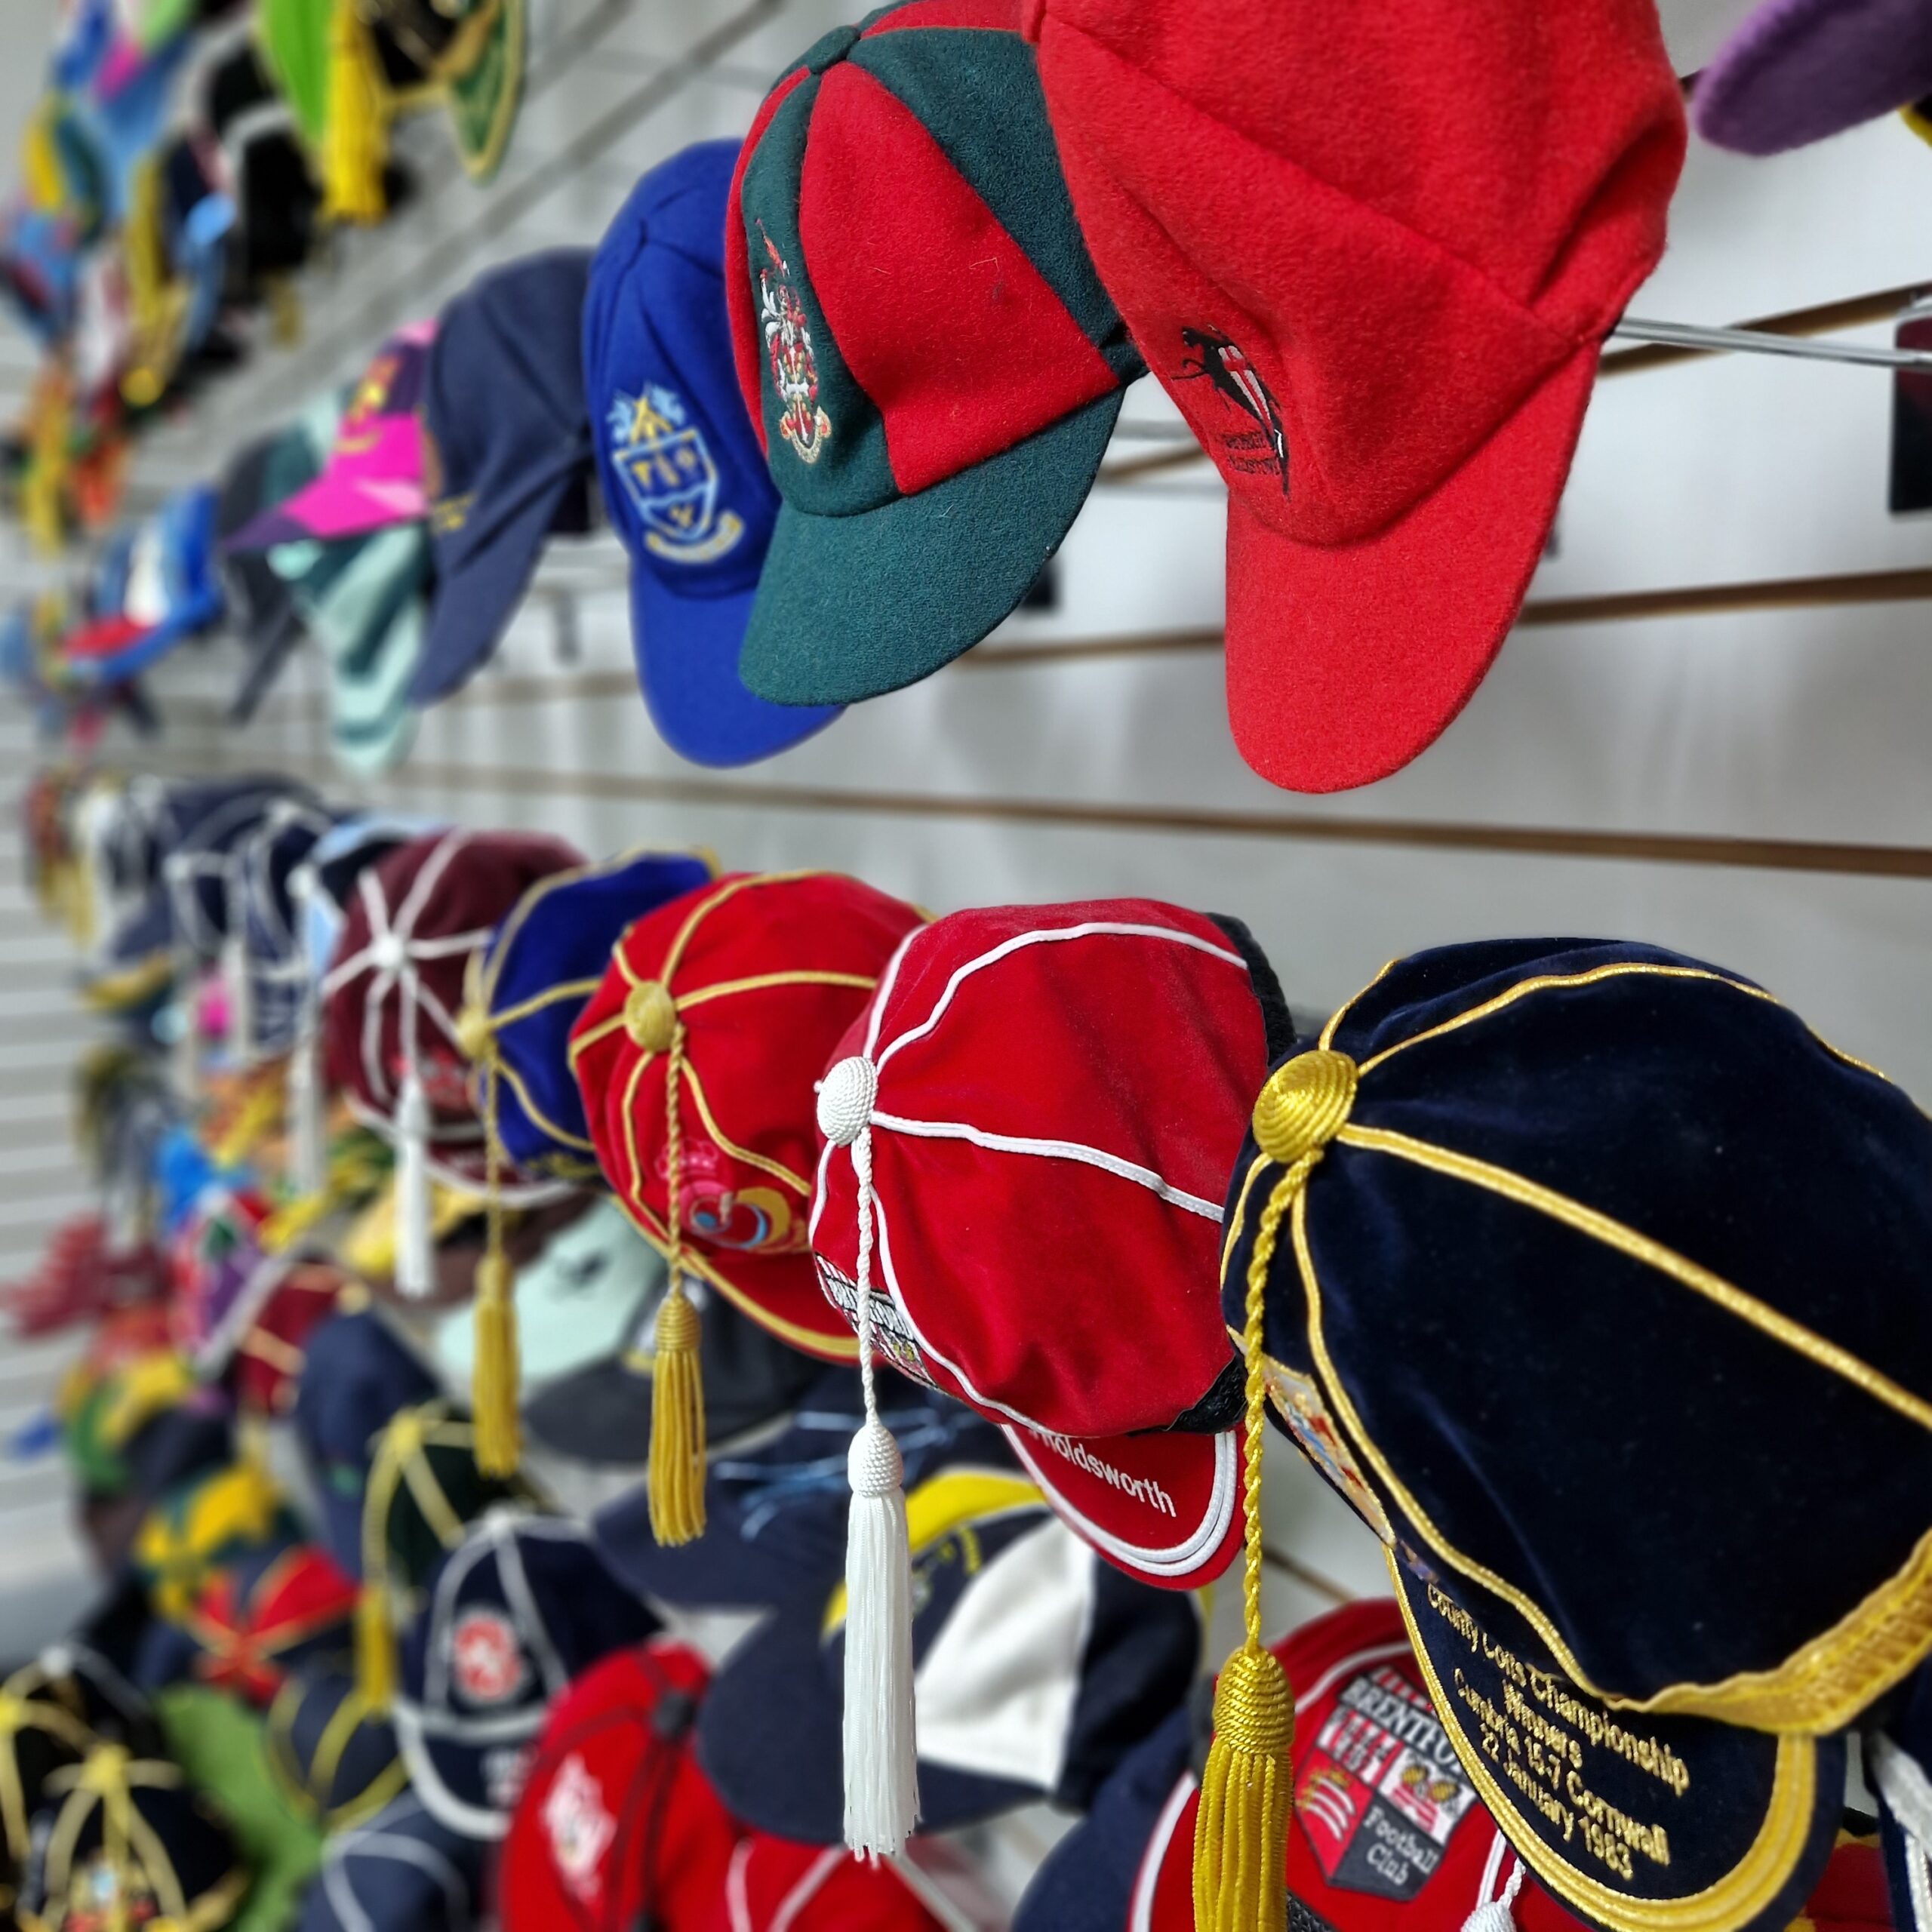 3 rows of honour caps that are hung on a wall for display at Gentlemen and Players shop in High Wycombe